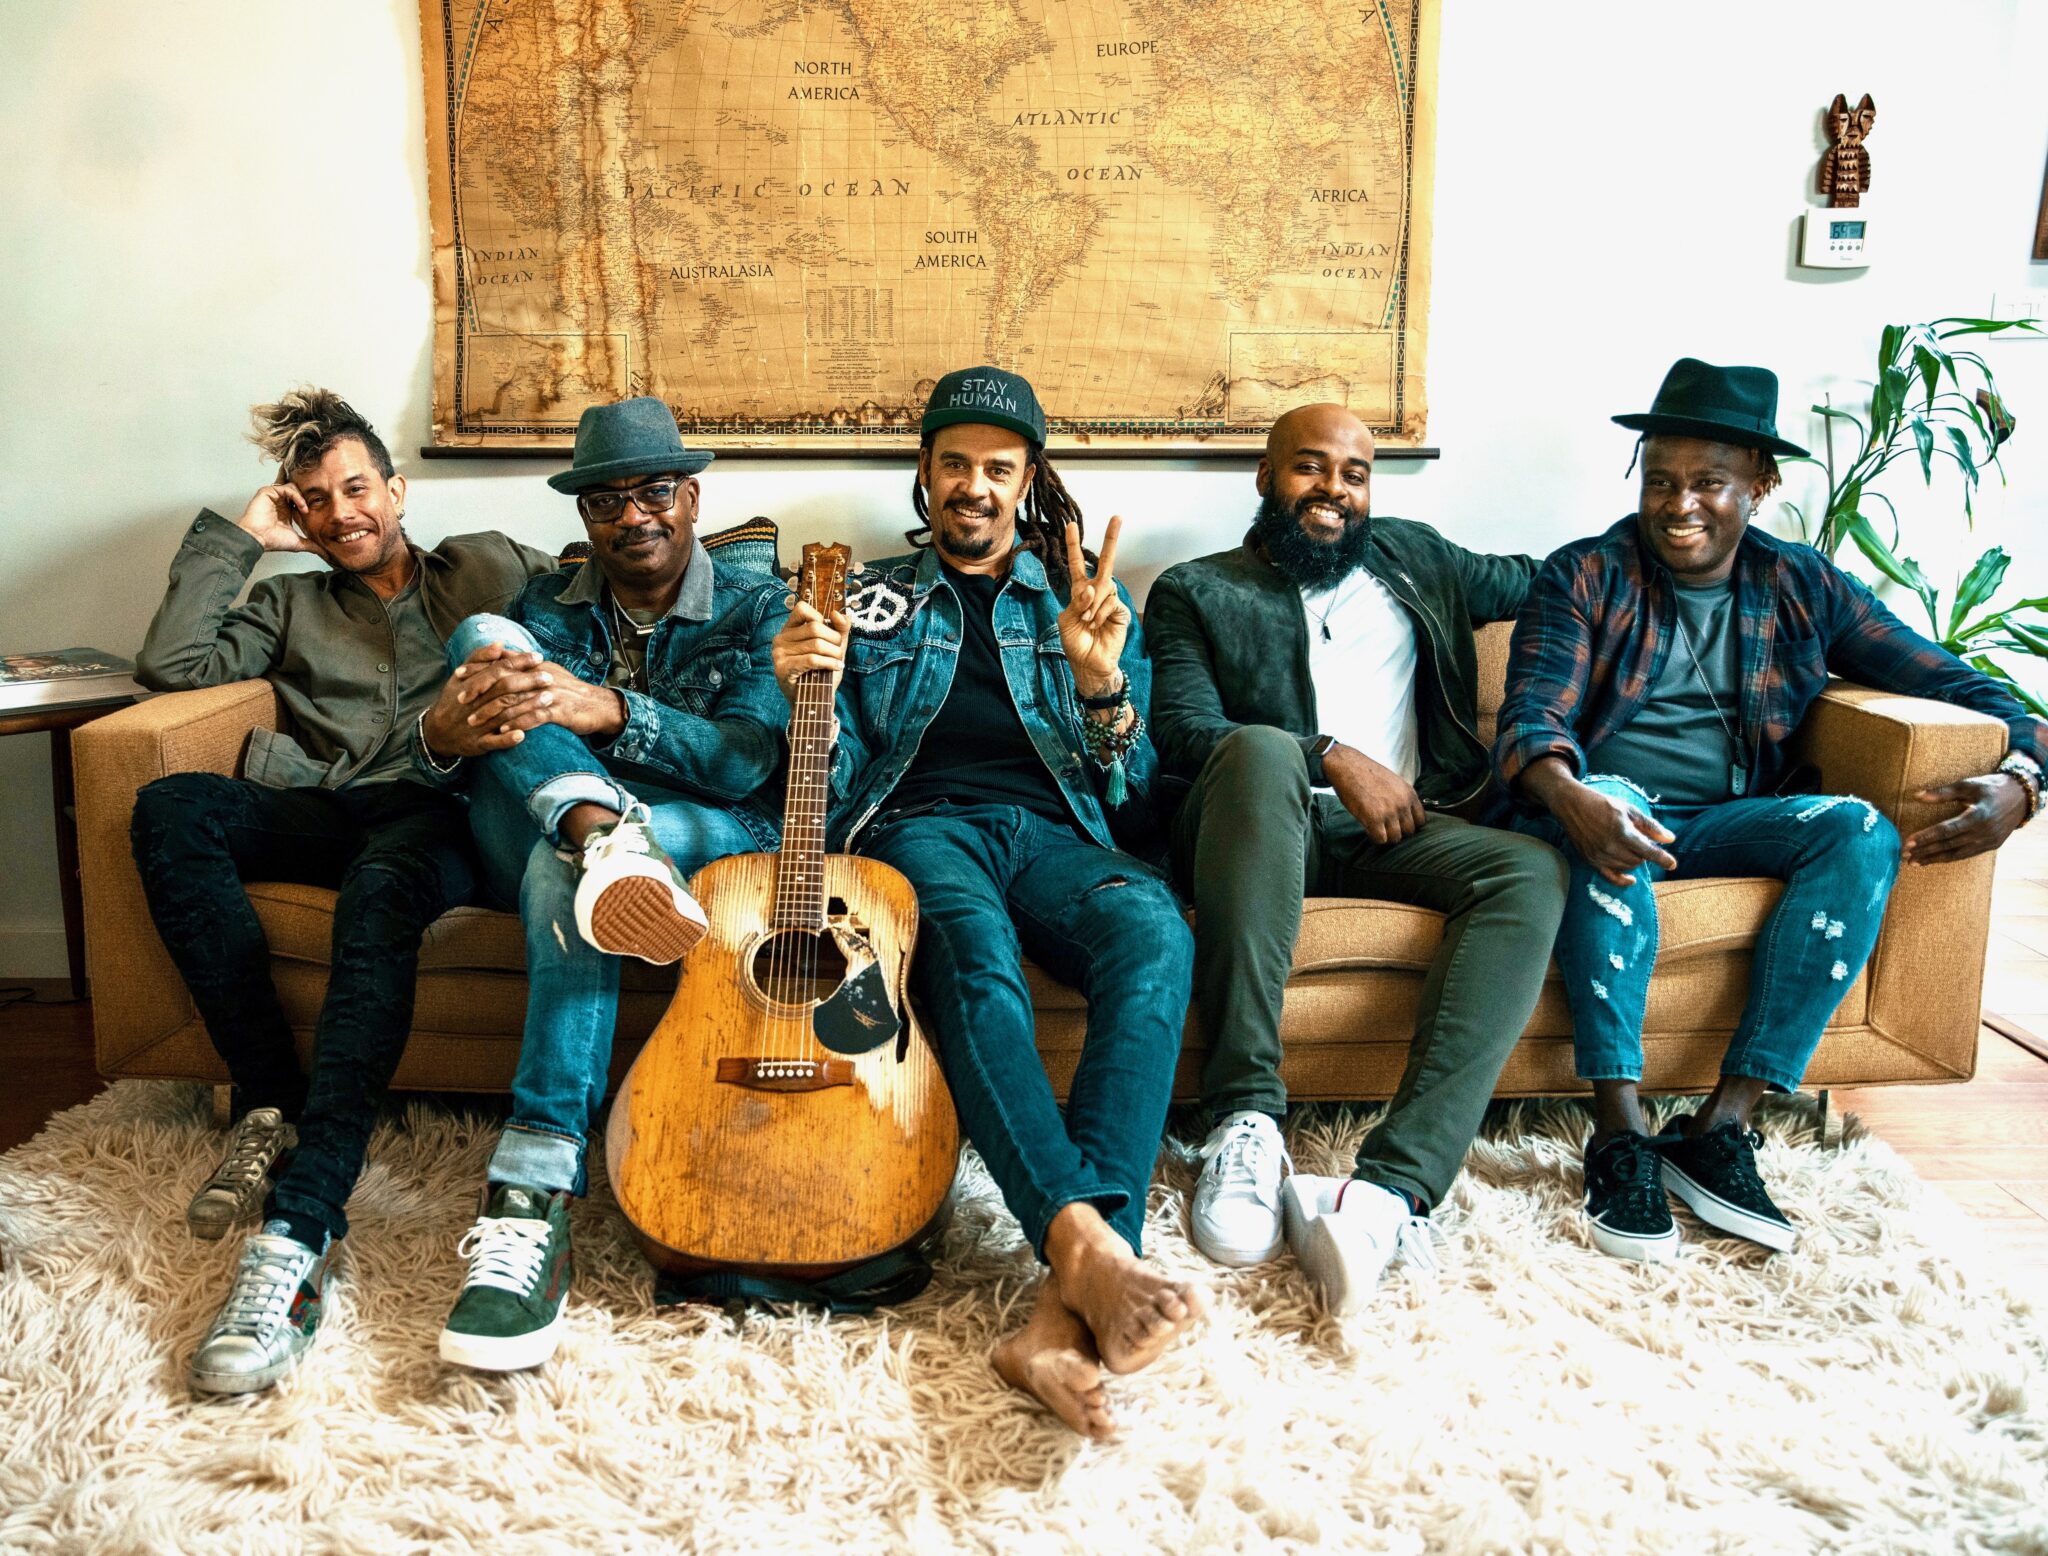 Michael Franti & Spearhead sitting on a couch smiling